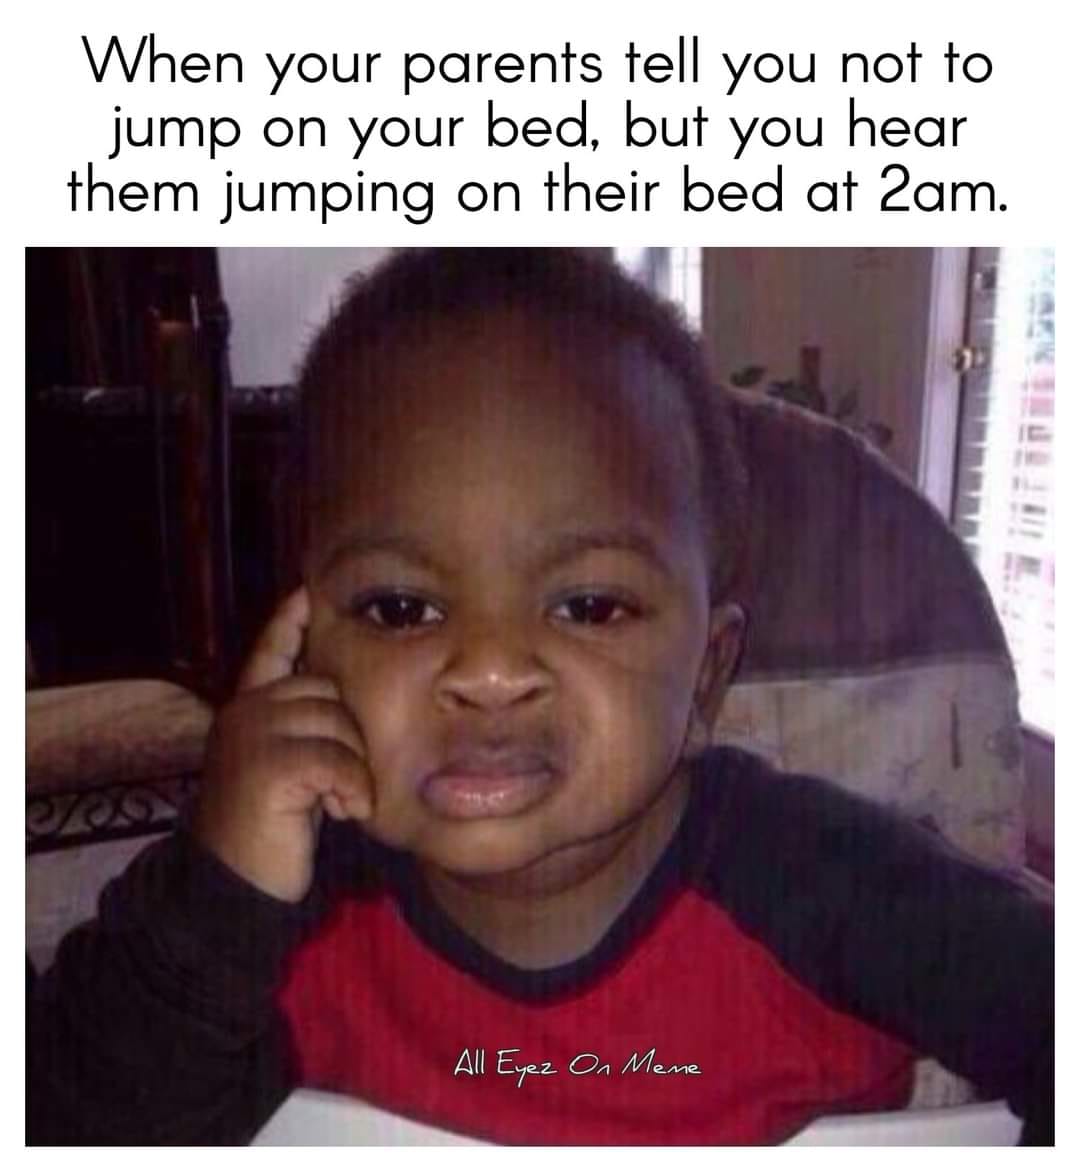 jamaican porridge meme - When your parents tell you not to jump on your bed, but you hear them jumping on their bed at 2am. All Eyez On Mene